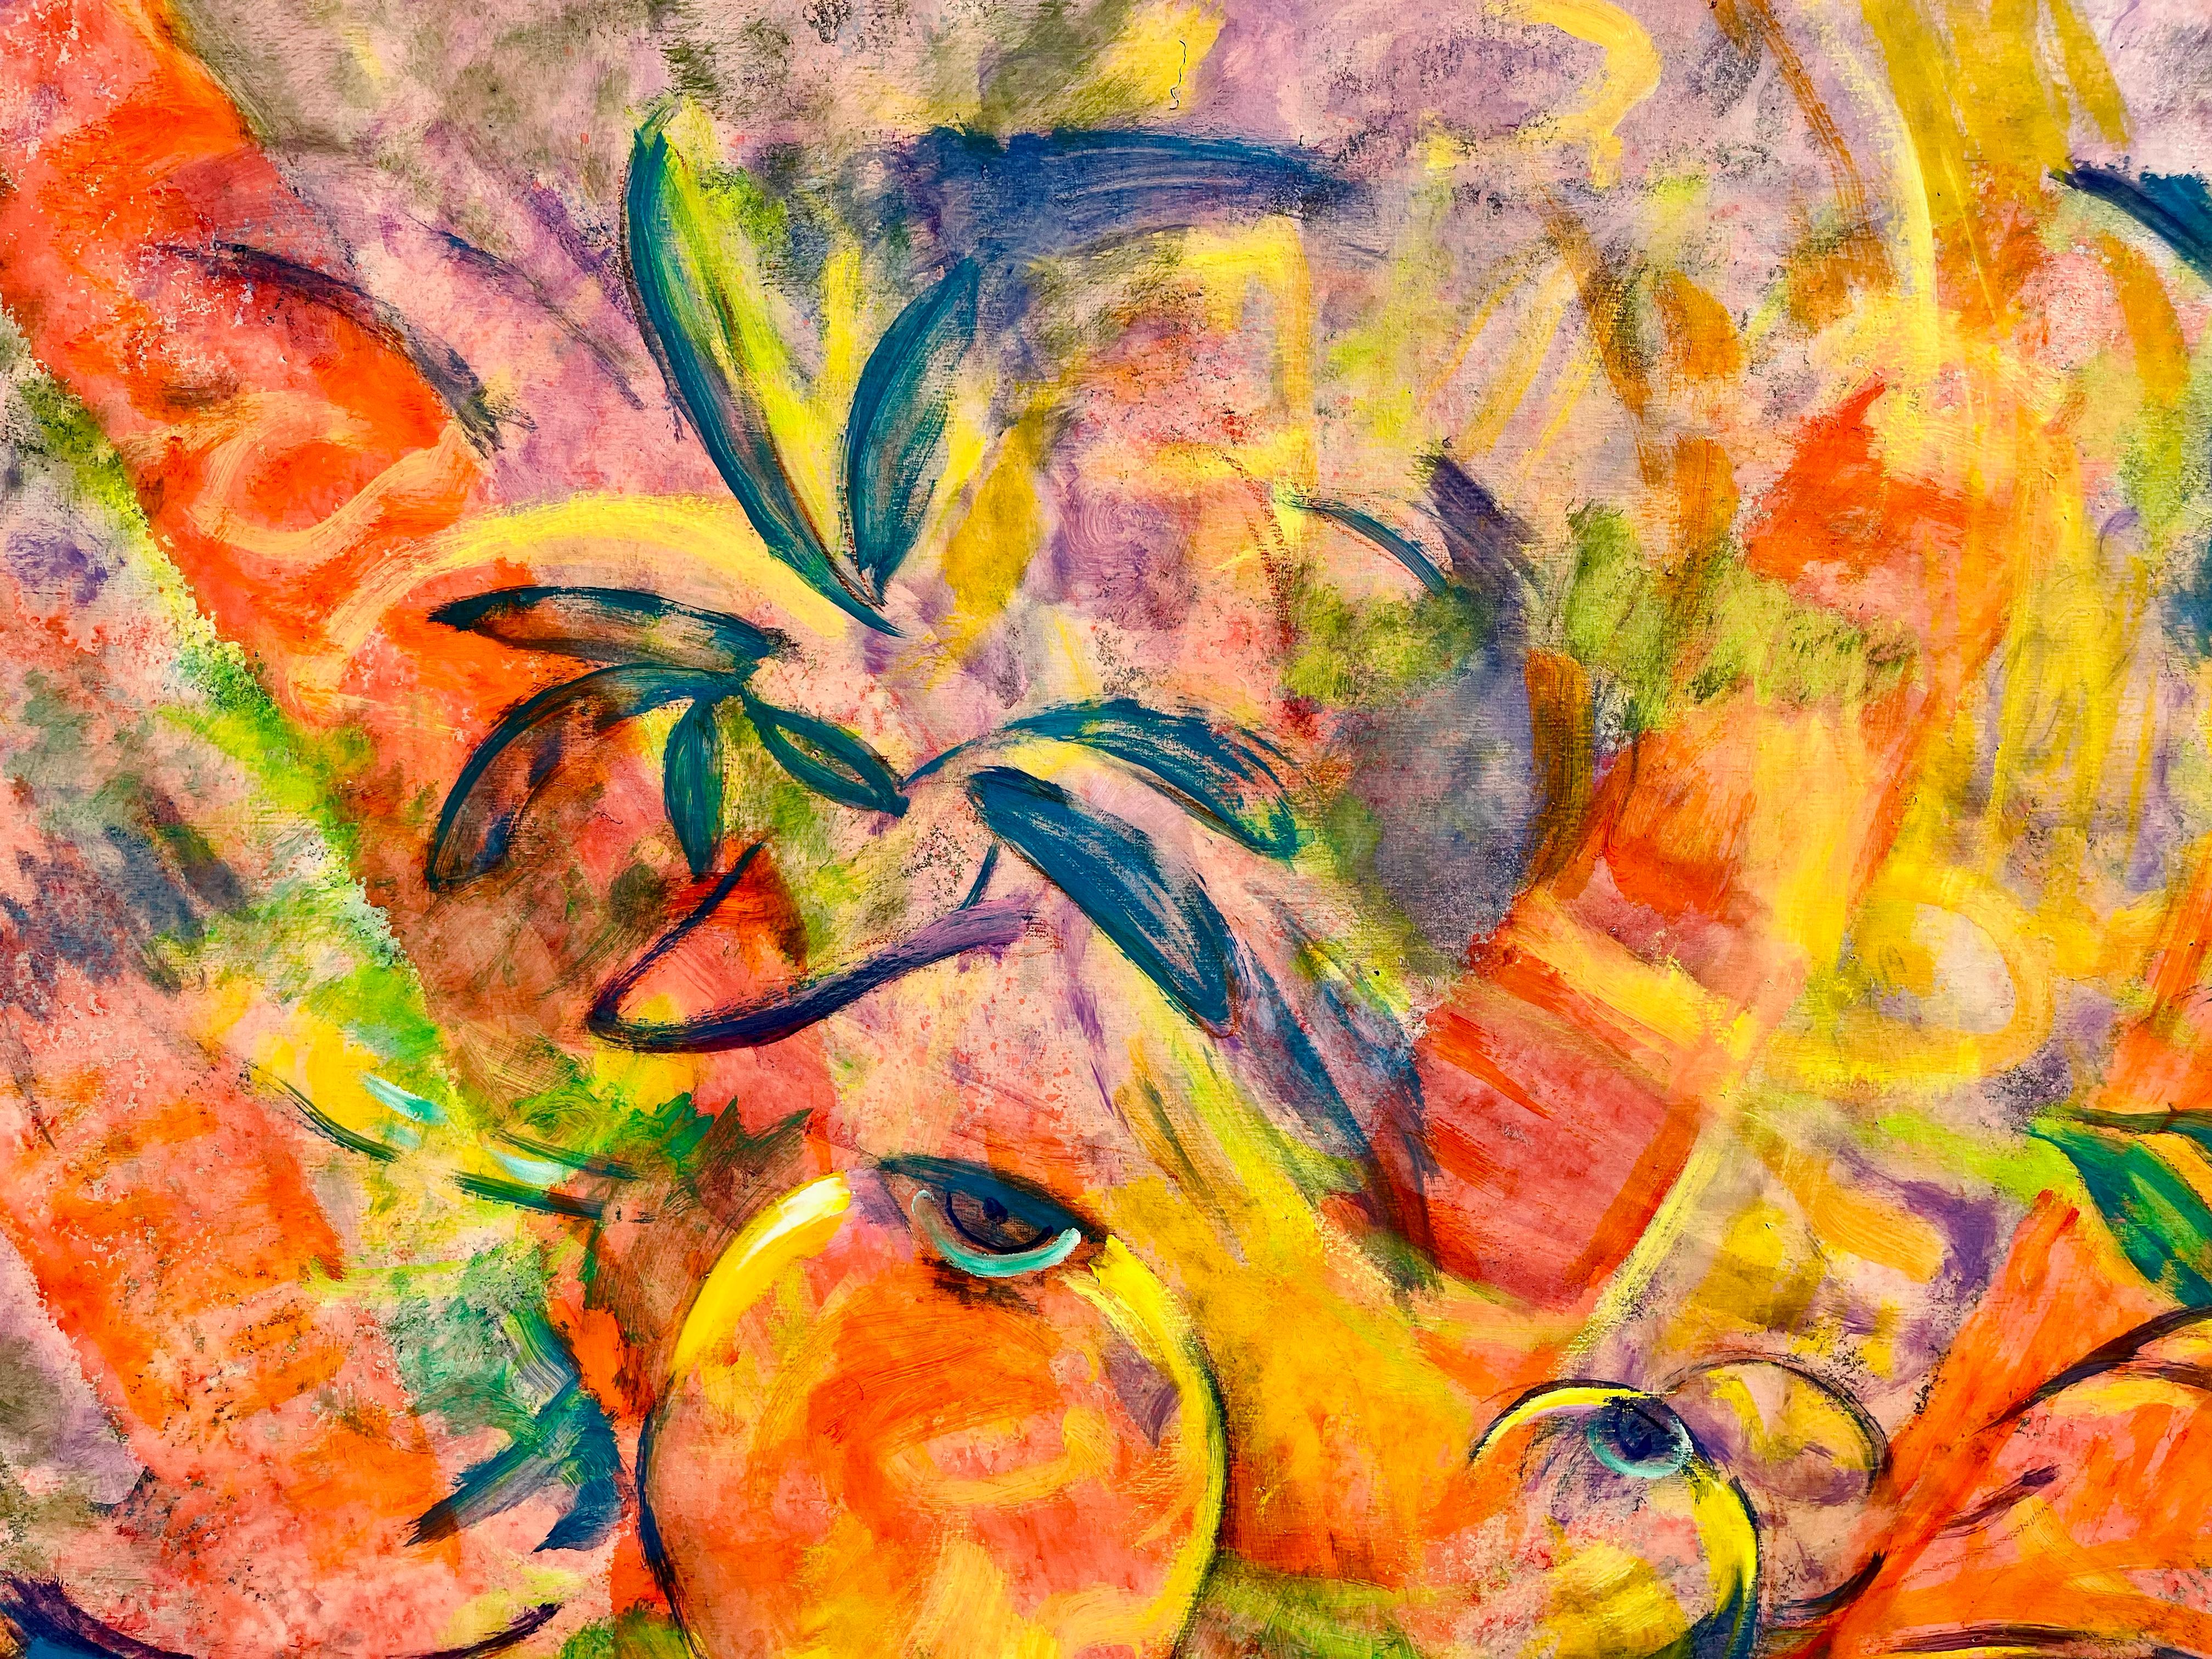 The Fruit Eyes - Expressionist Painting by Evelyne Ballestra